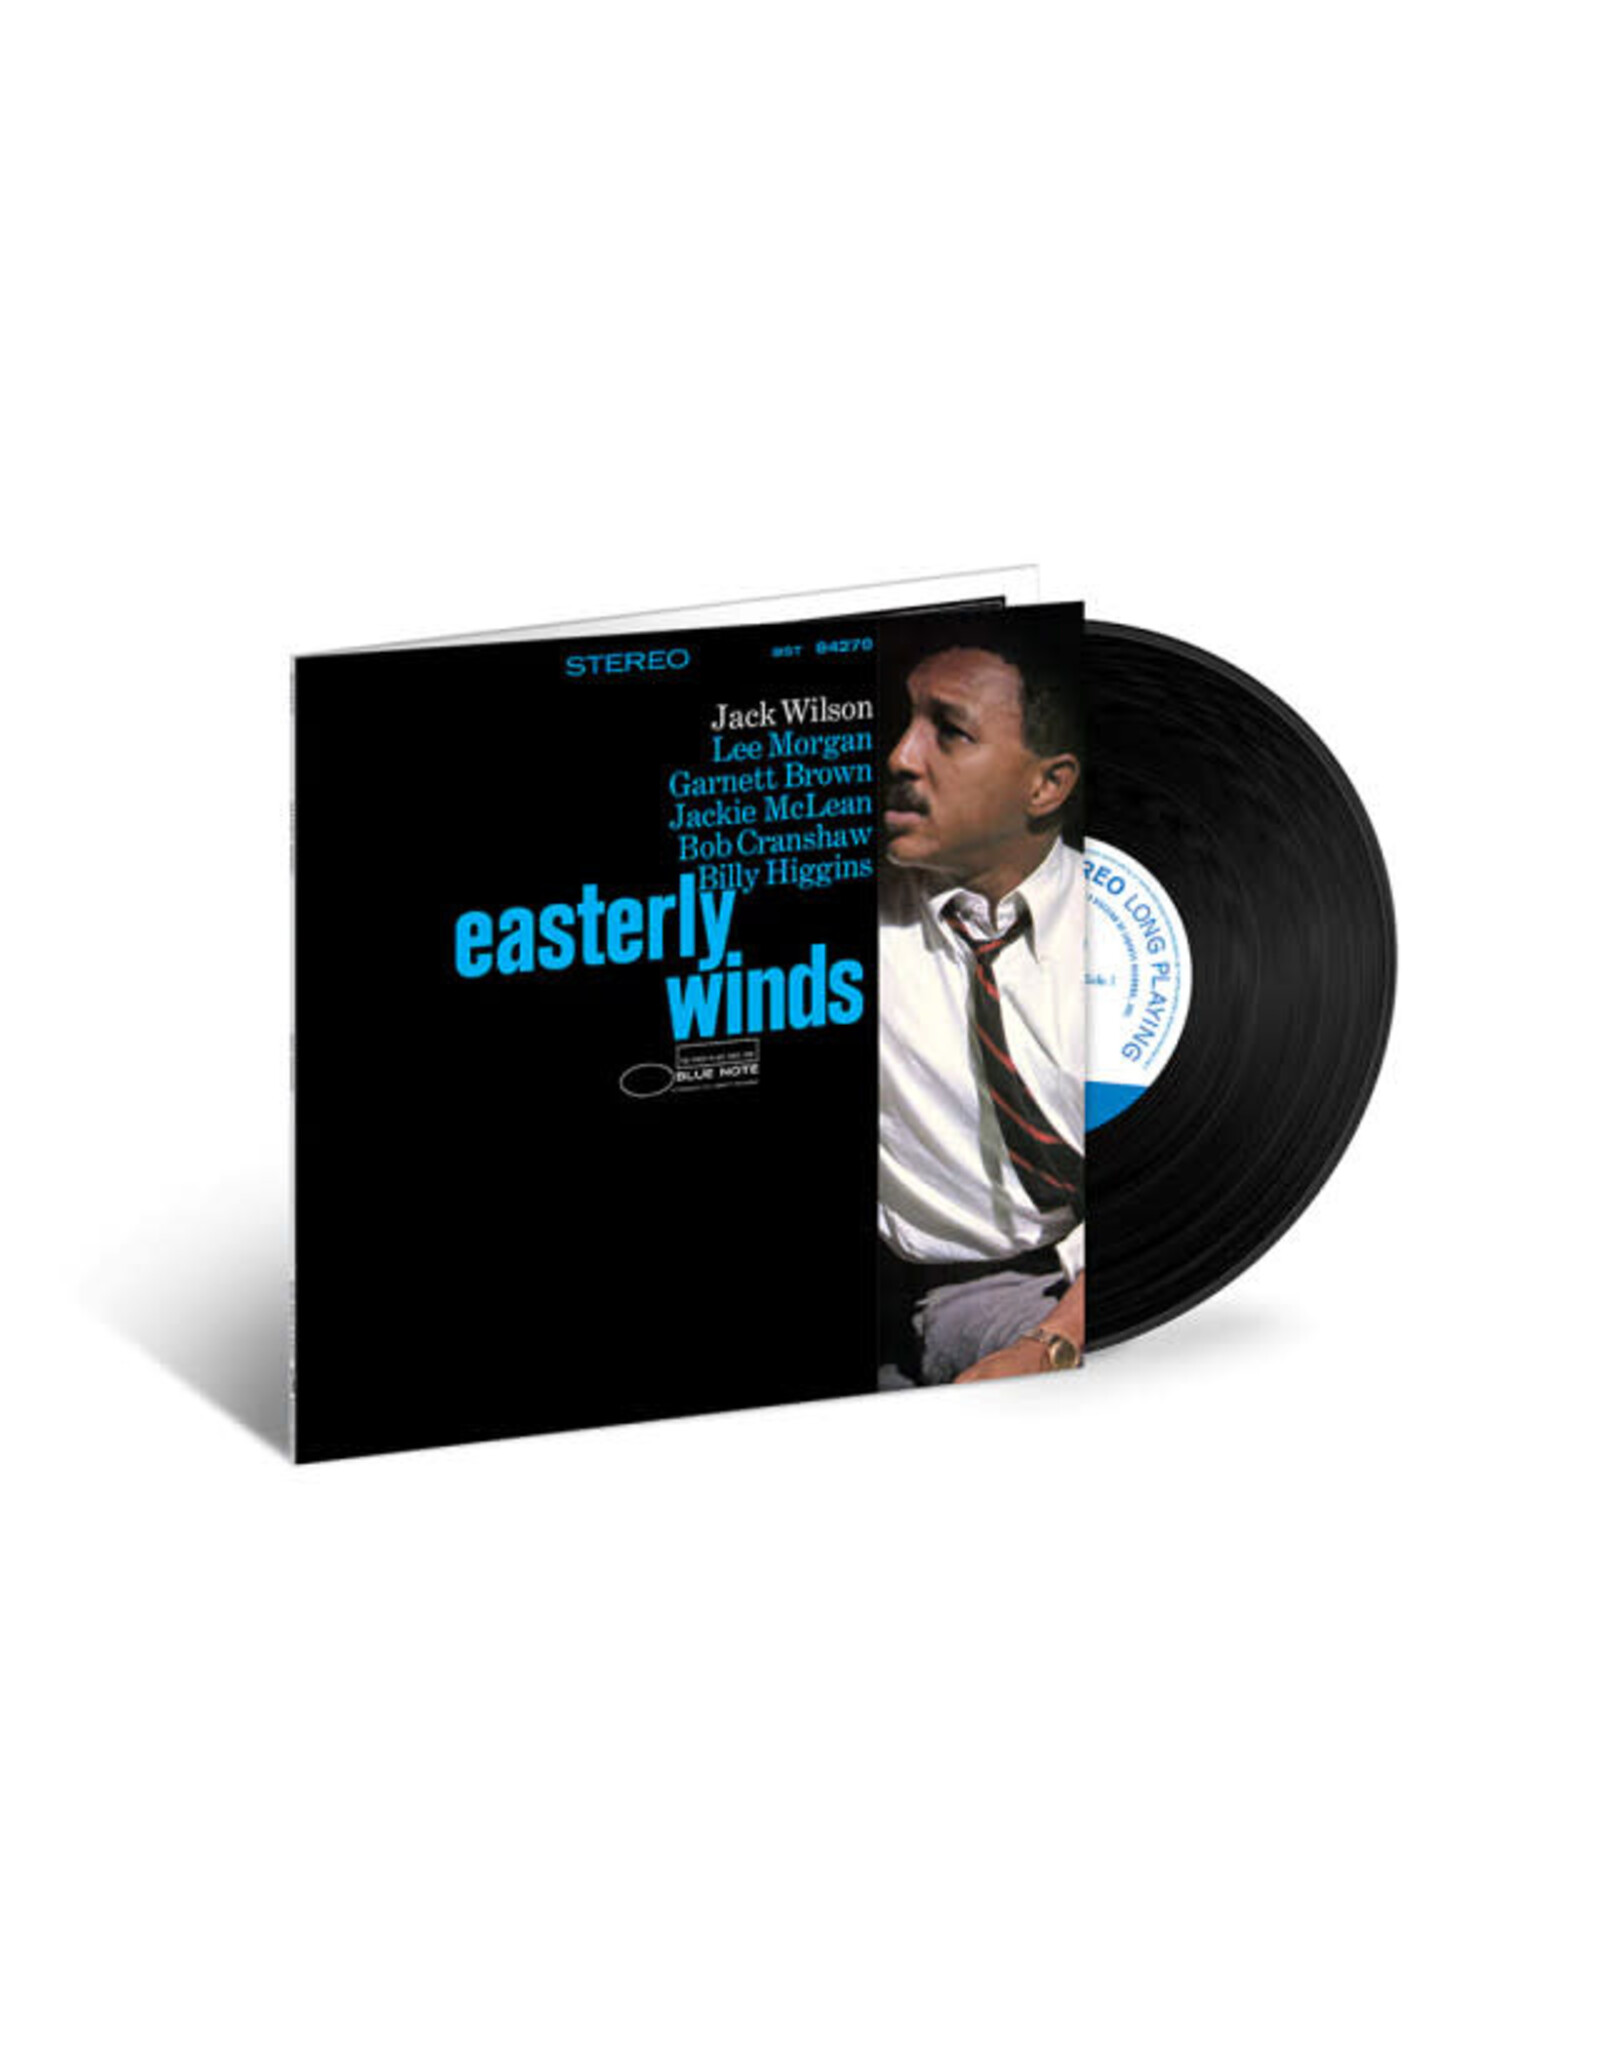 Blue Note Wilson, Jack: Easterly Winds (Blue Note Tone Poet) LP